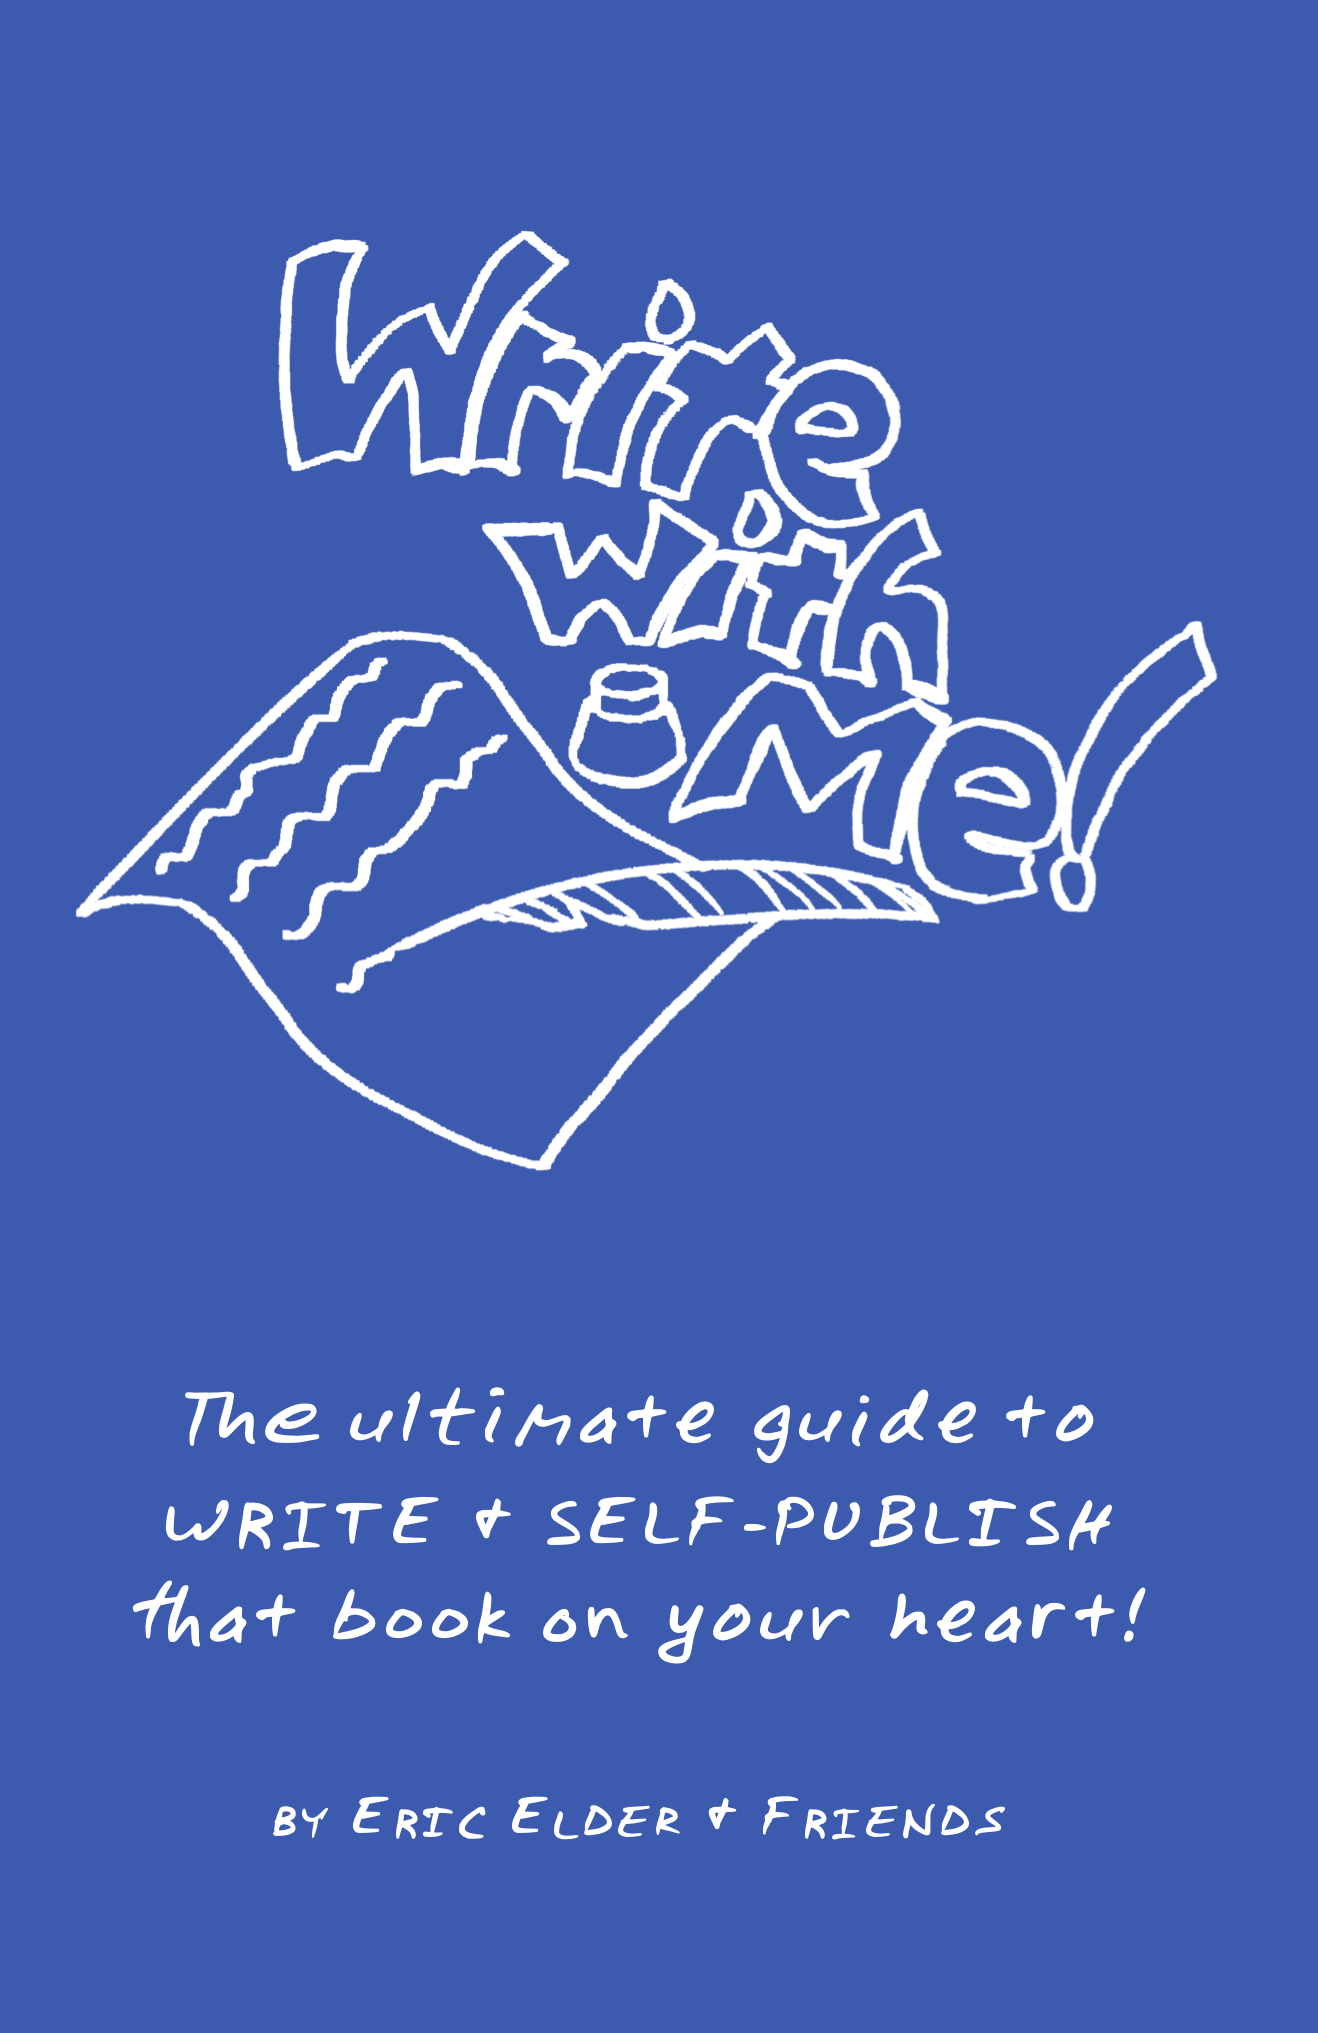 Write with Me! The ultimate guide to WRITE & SELF-PUBLISH that book on your heart. By Eric Elder & Friends